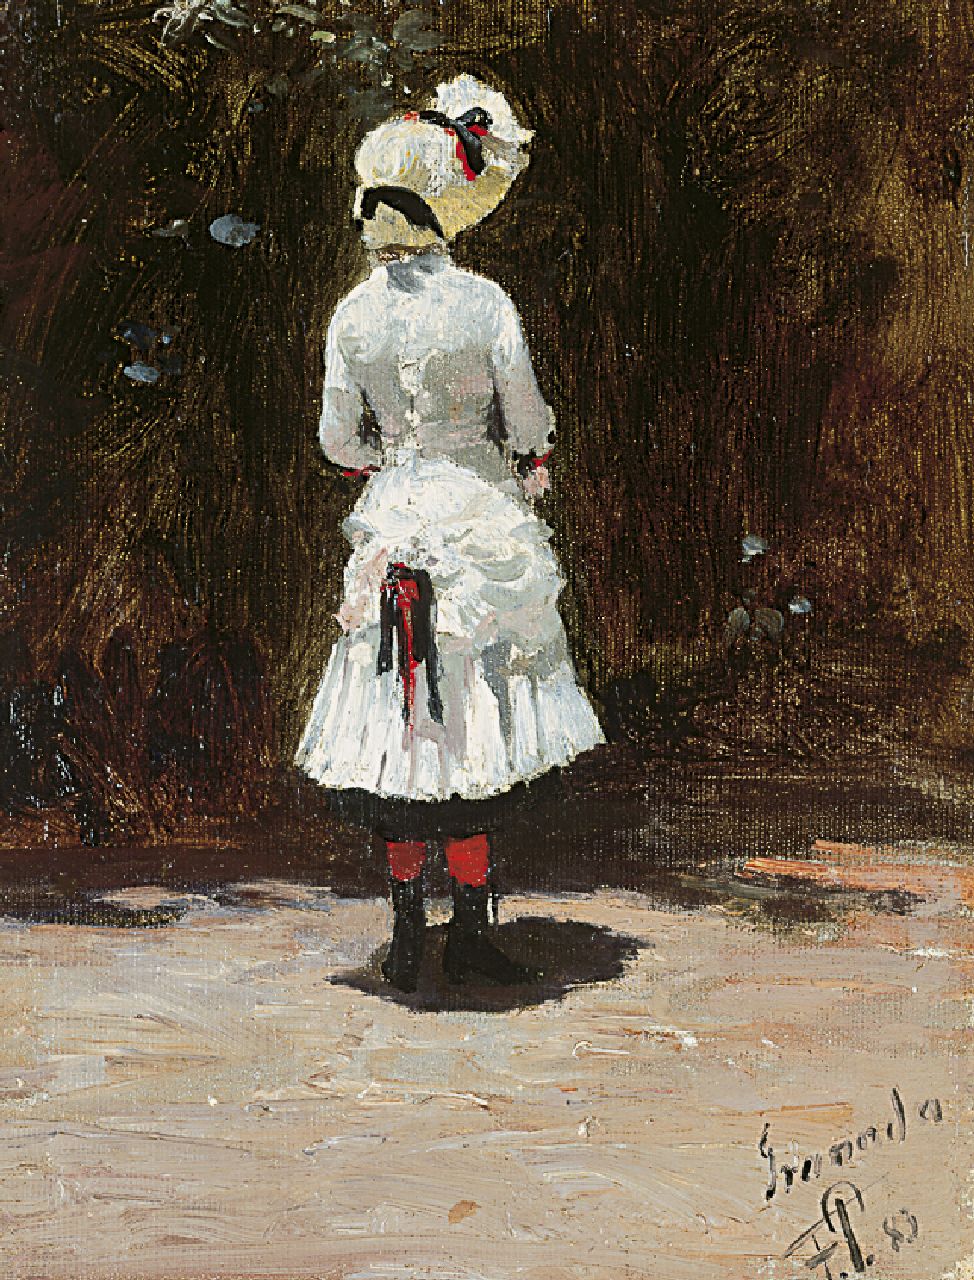 Francisco Peralta del Campo | A Spanish girl, Öl auf Leinwand  auf Holzfaser, 19,5 x 14,8 cm, signed l.r. with initials und dated '83